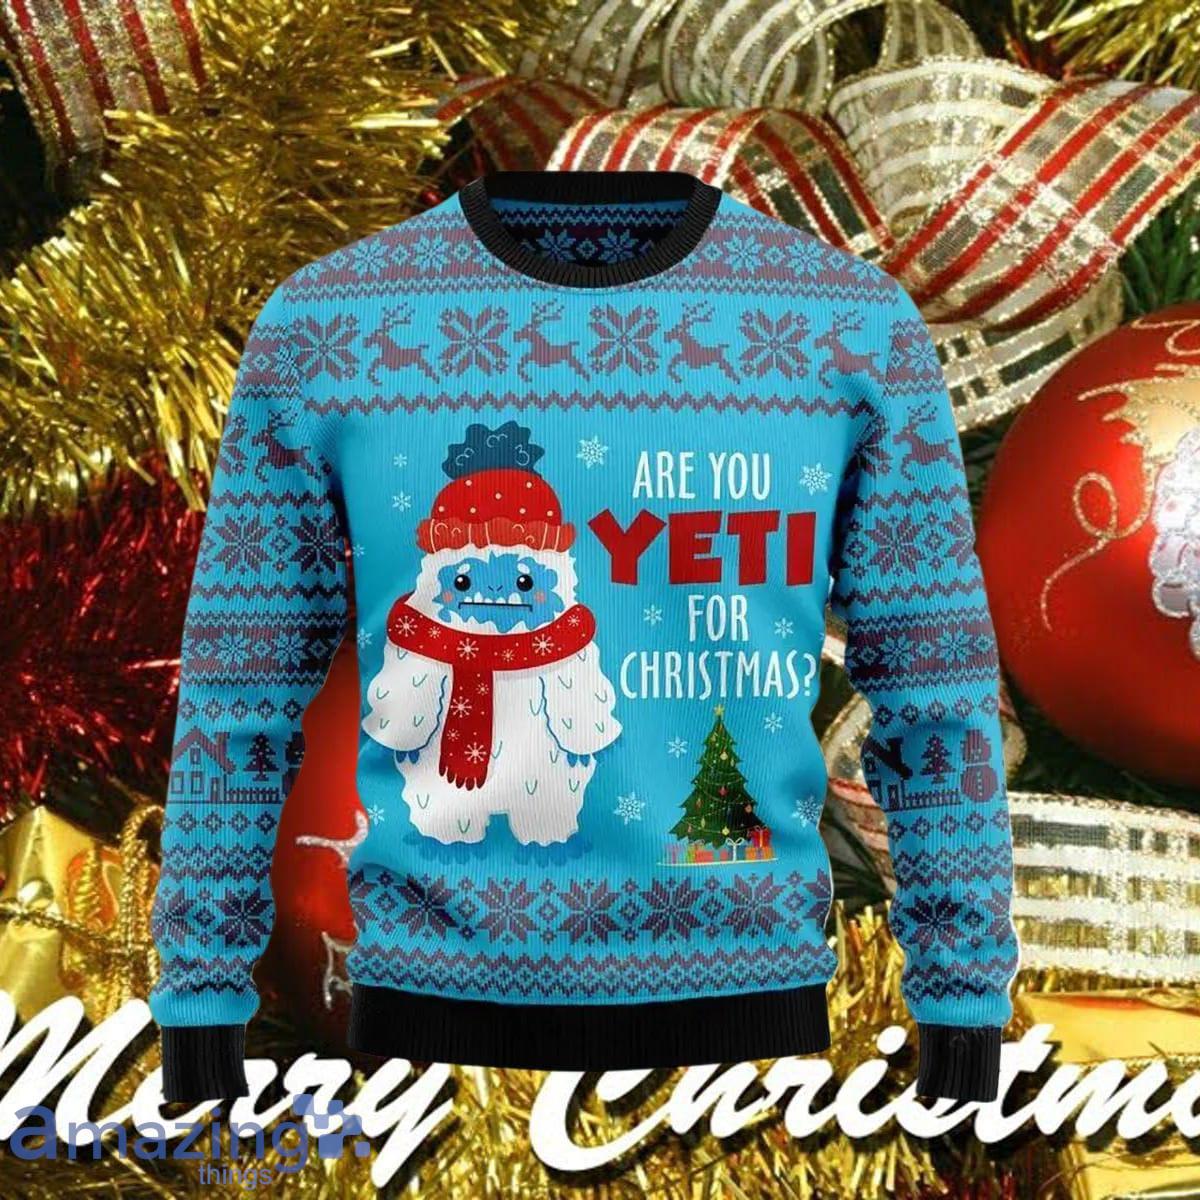 Yeti Christmas Ugly Christmas Sweater Impressive Gift For Men And Women